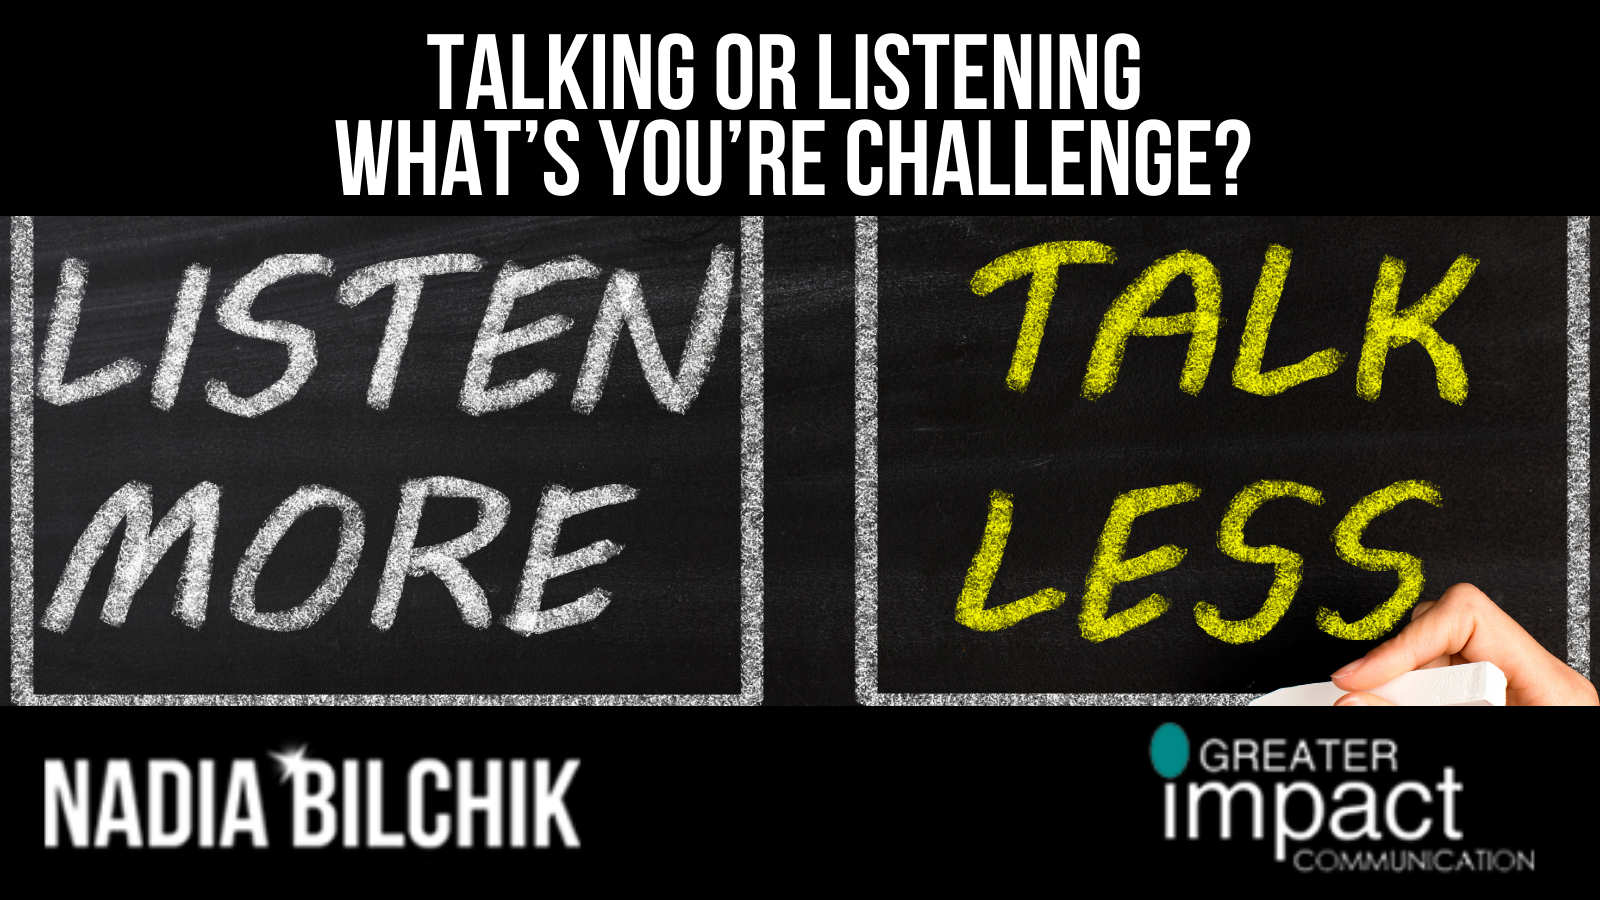 What are you listening to today? - Learning and discussion - KeebTalk